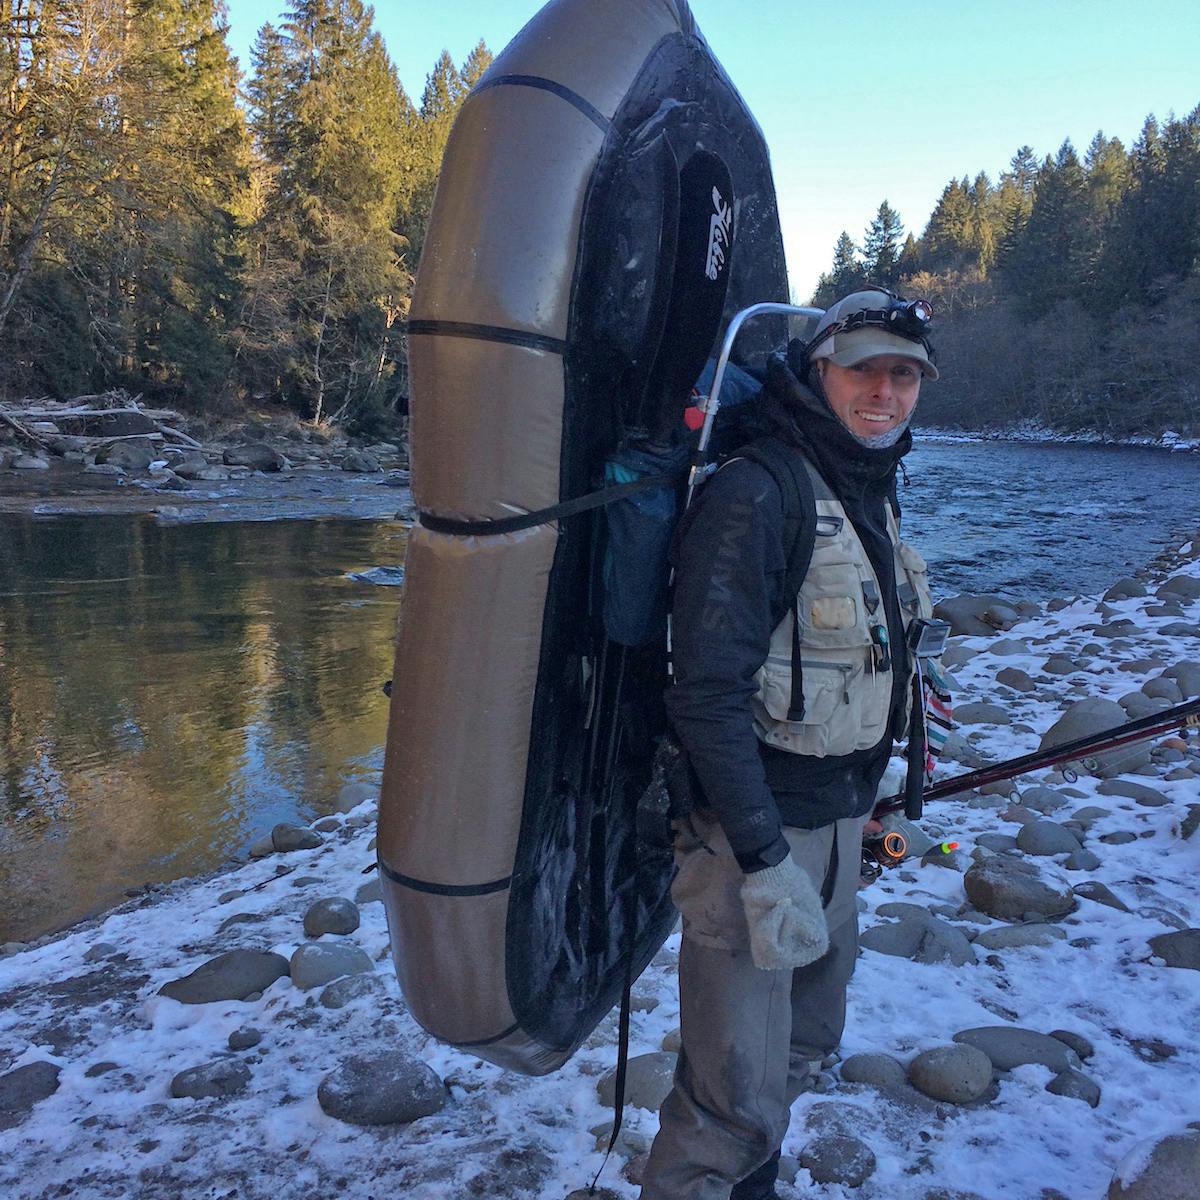 Packing around rapids is always safer than running them; especially in the winter. I use my Alpacka to run soft sections of the river but avoid technical water. It&#x2019;s easy to deflate the boat for longer walks, but this photo is a common occurrence whenever there&#x2019;s enough bank space. Trust me, its colder than it looks.